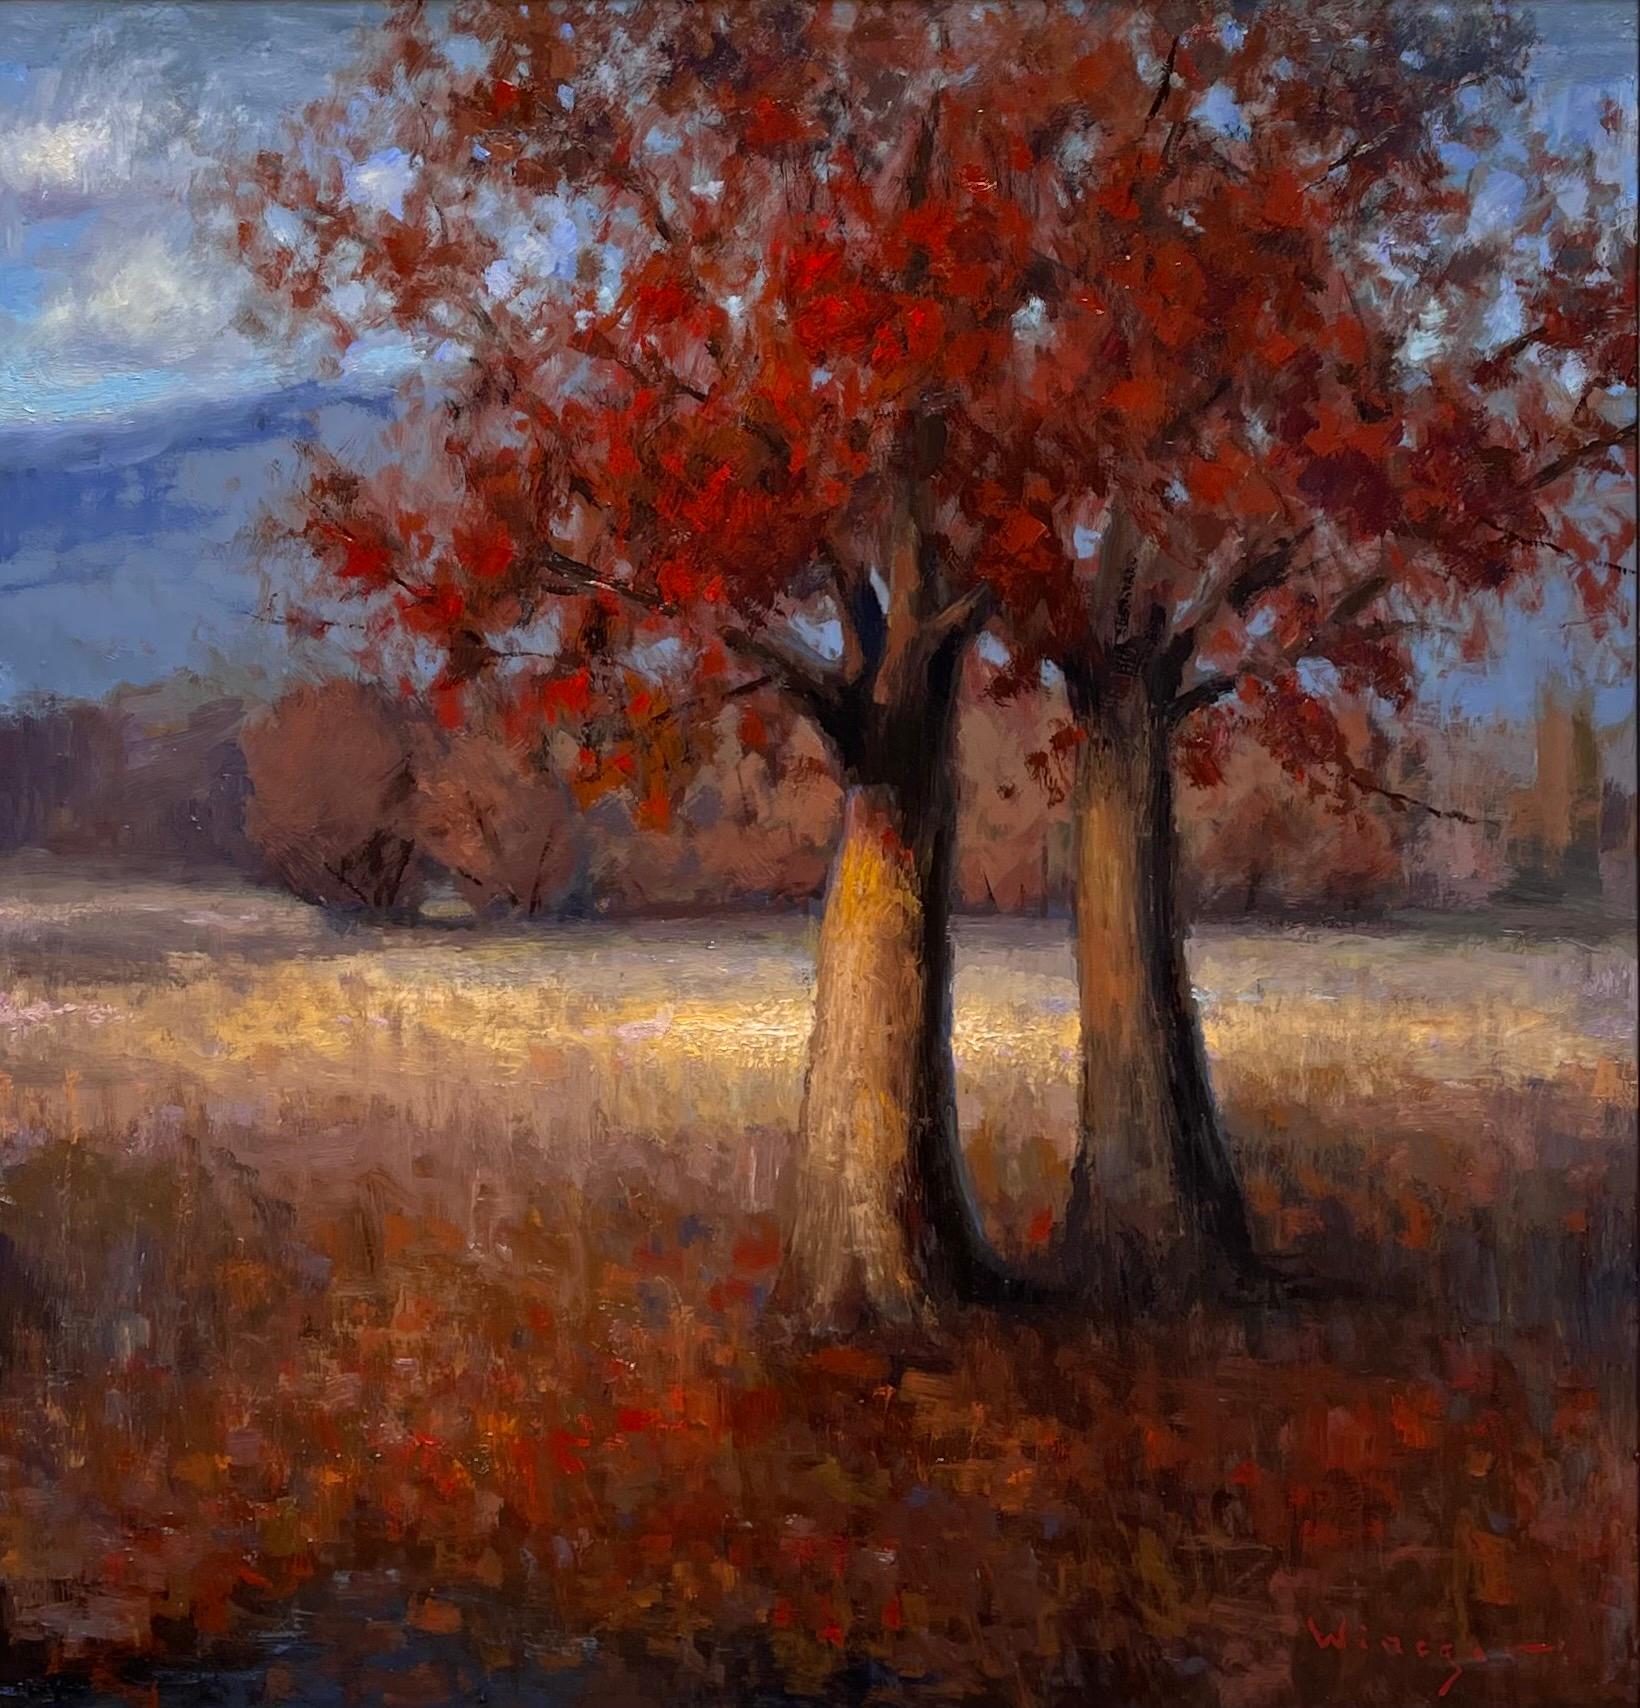 Seth Winegar Landscape Painting - "Life Transitions of Fall" Oil Painting